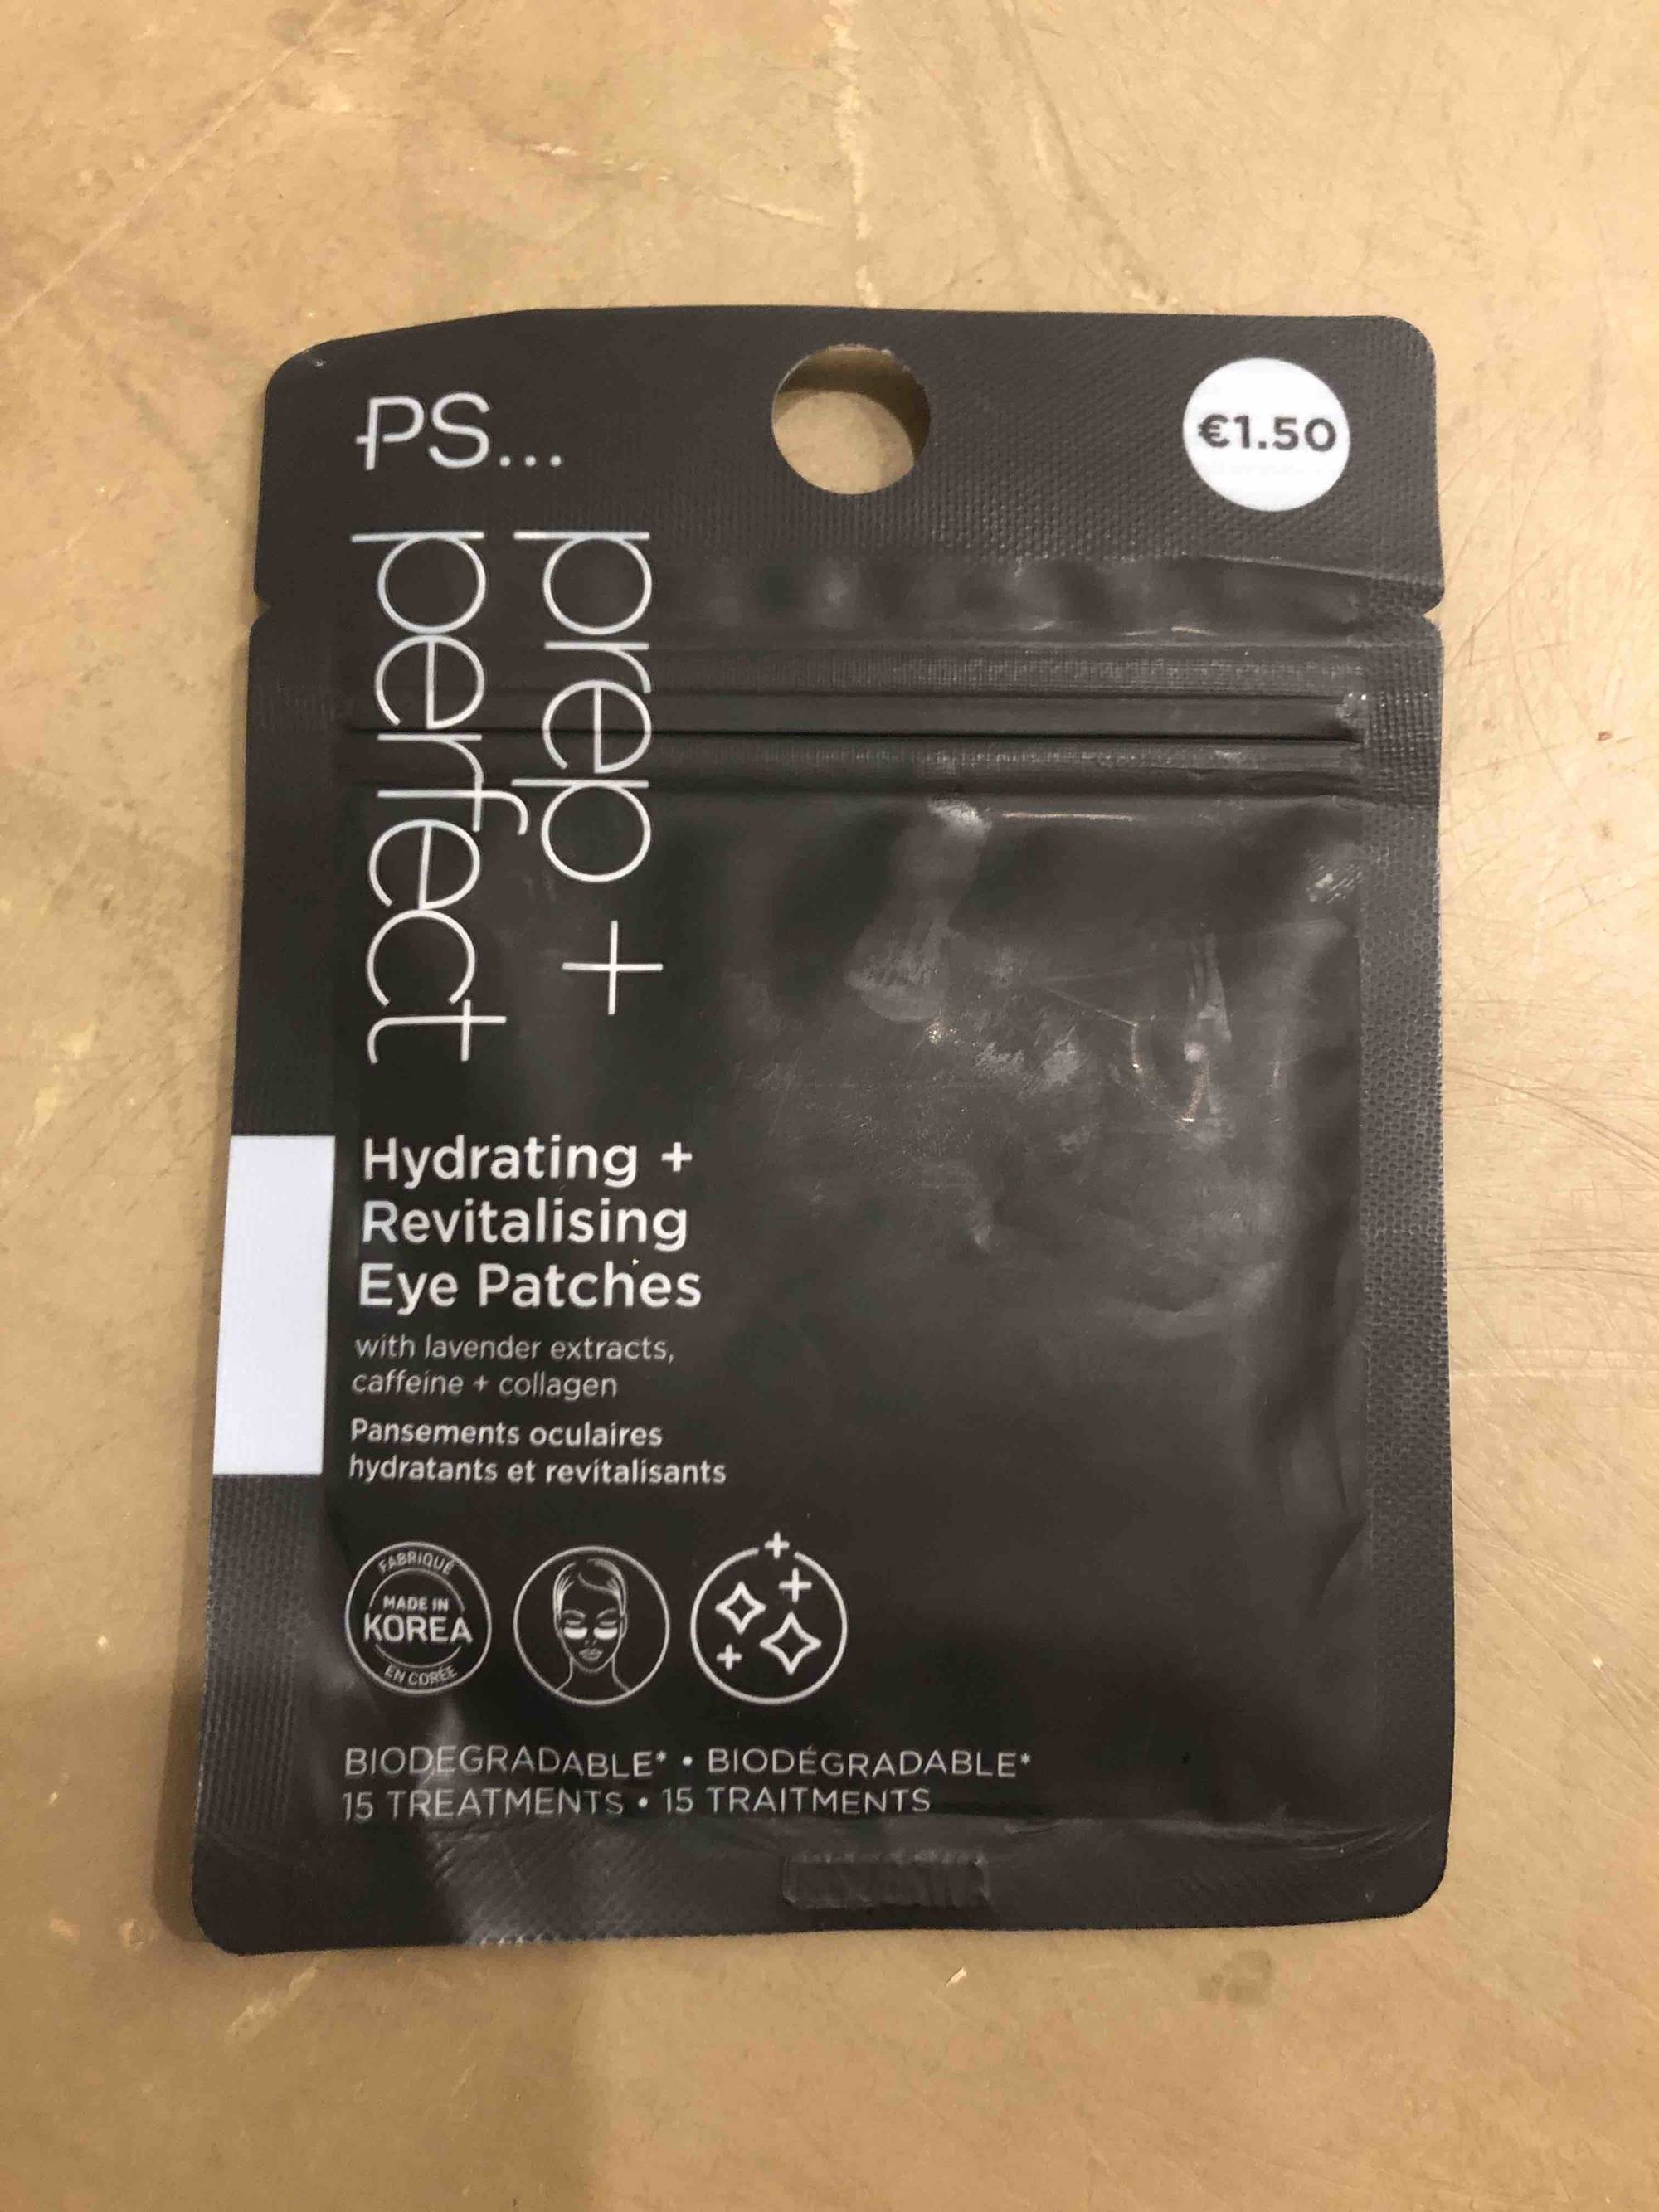 PRIMARK - PS... perp + perfect - Eye patches